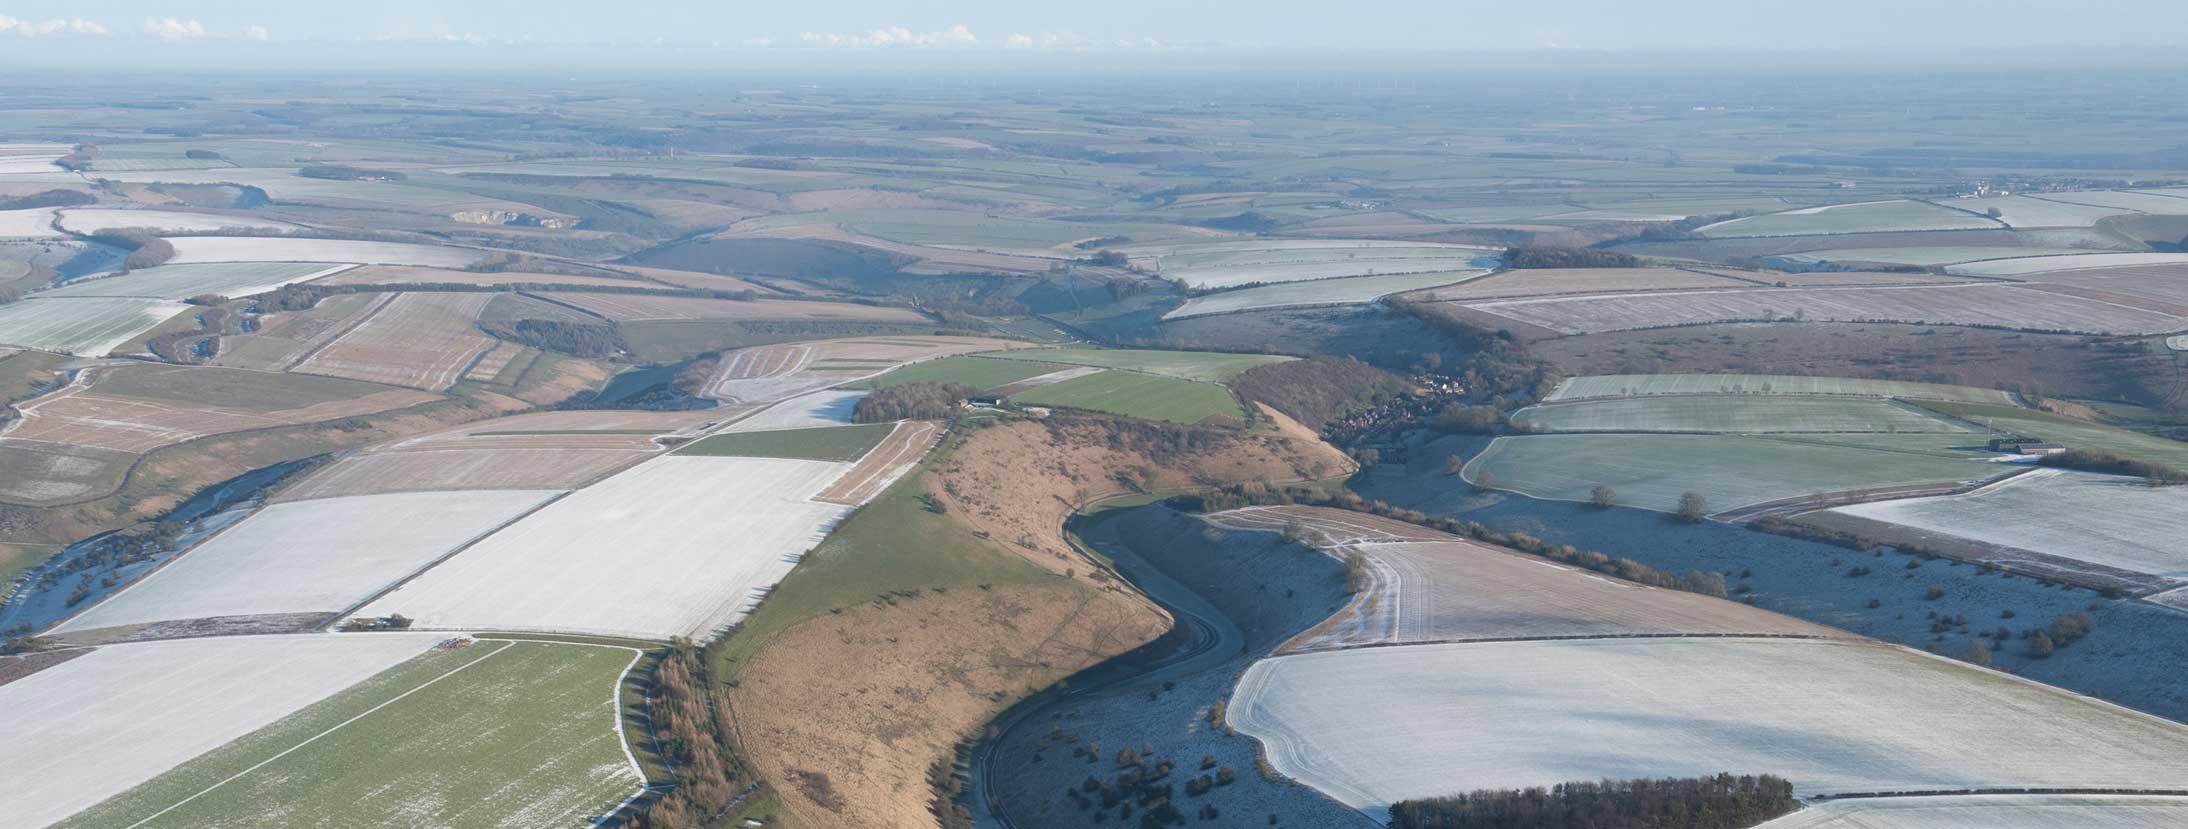 Aerial view of landscape with some fields covered in snow.